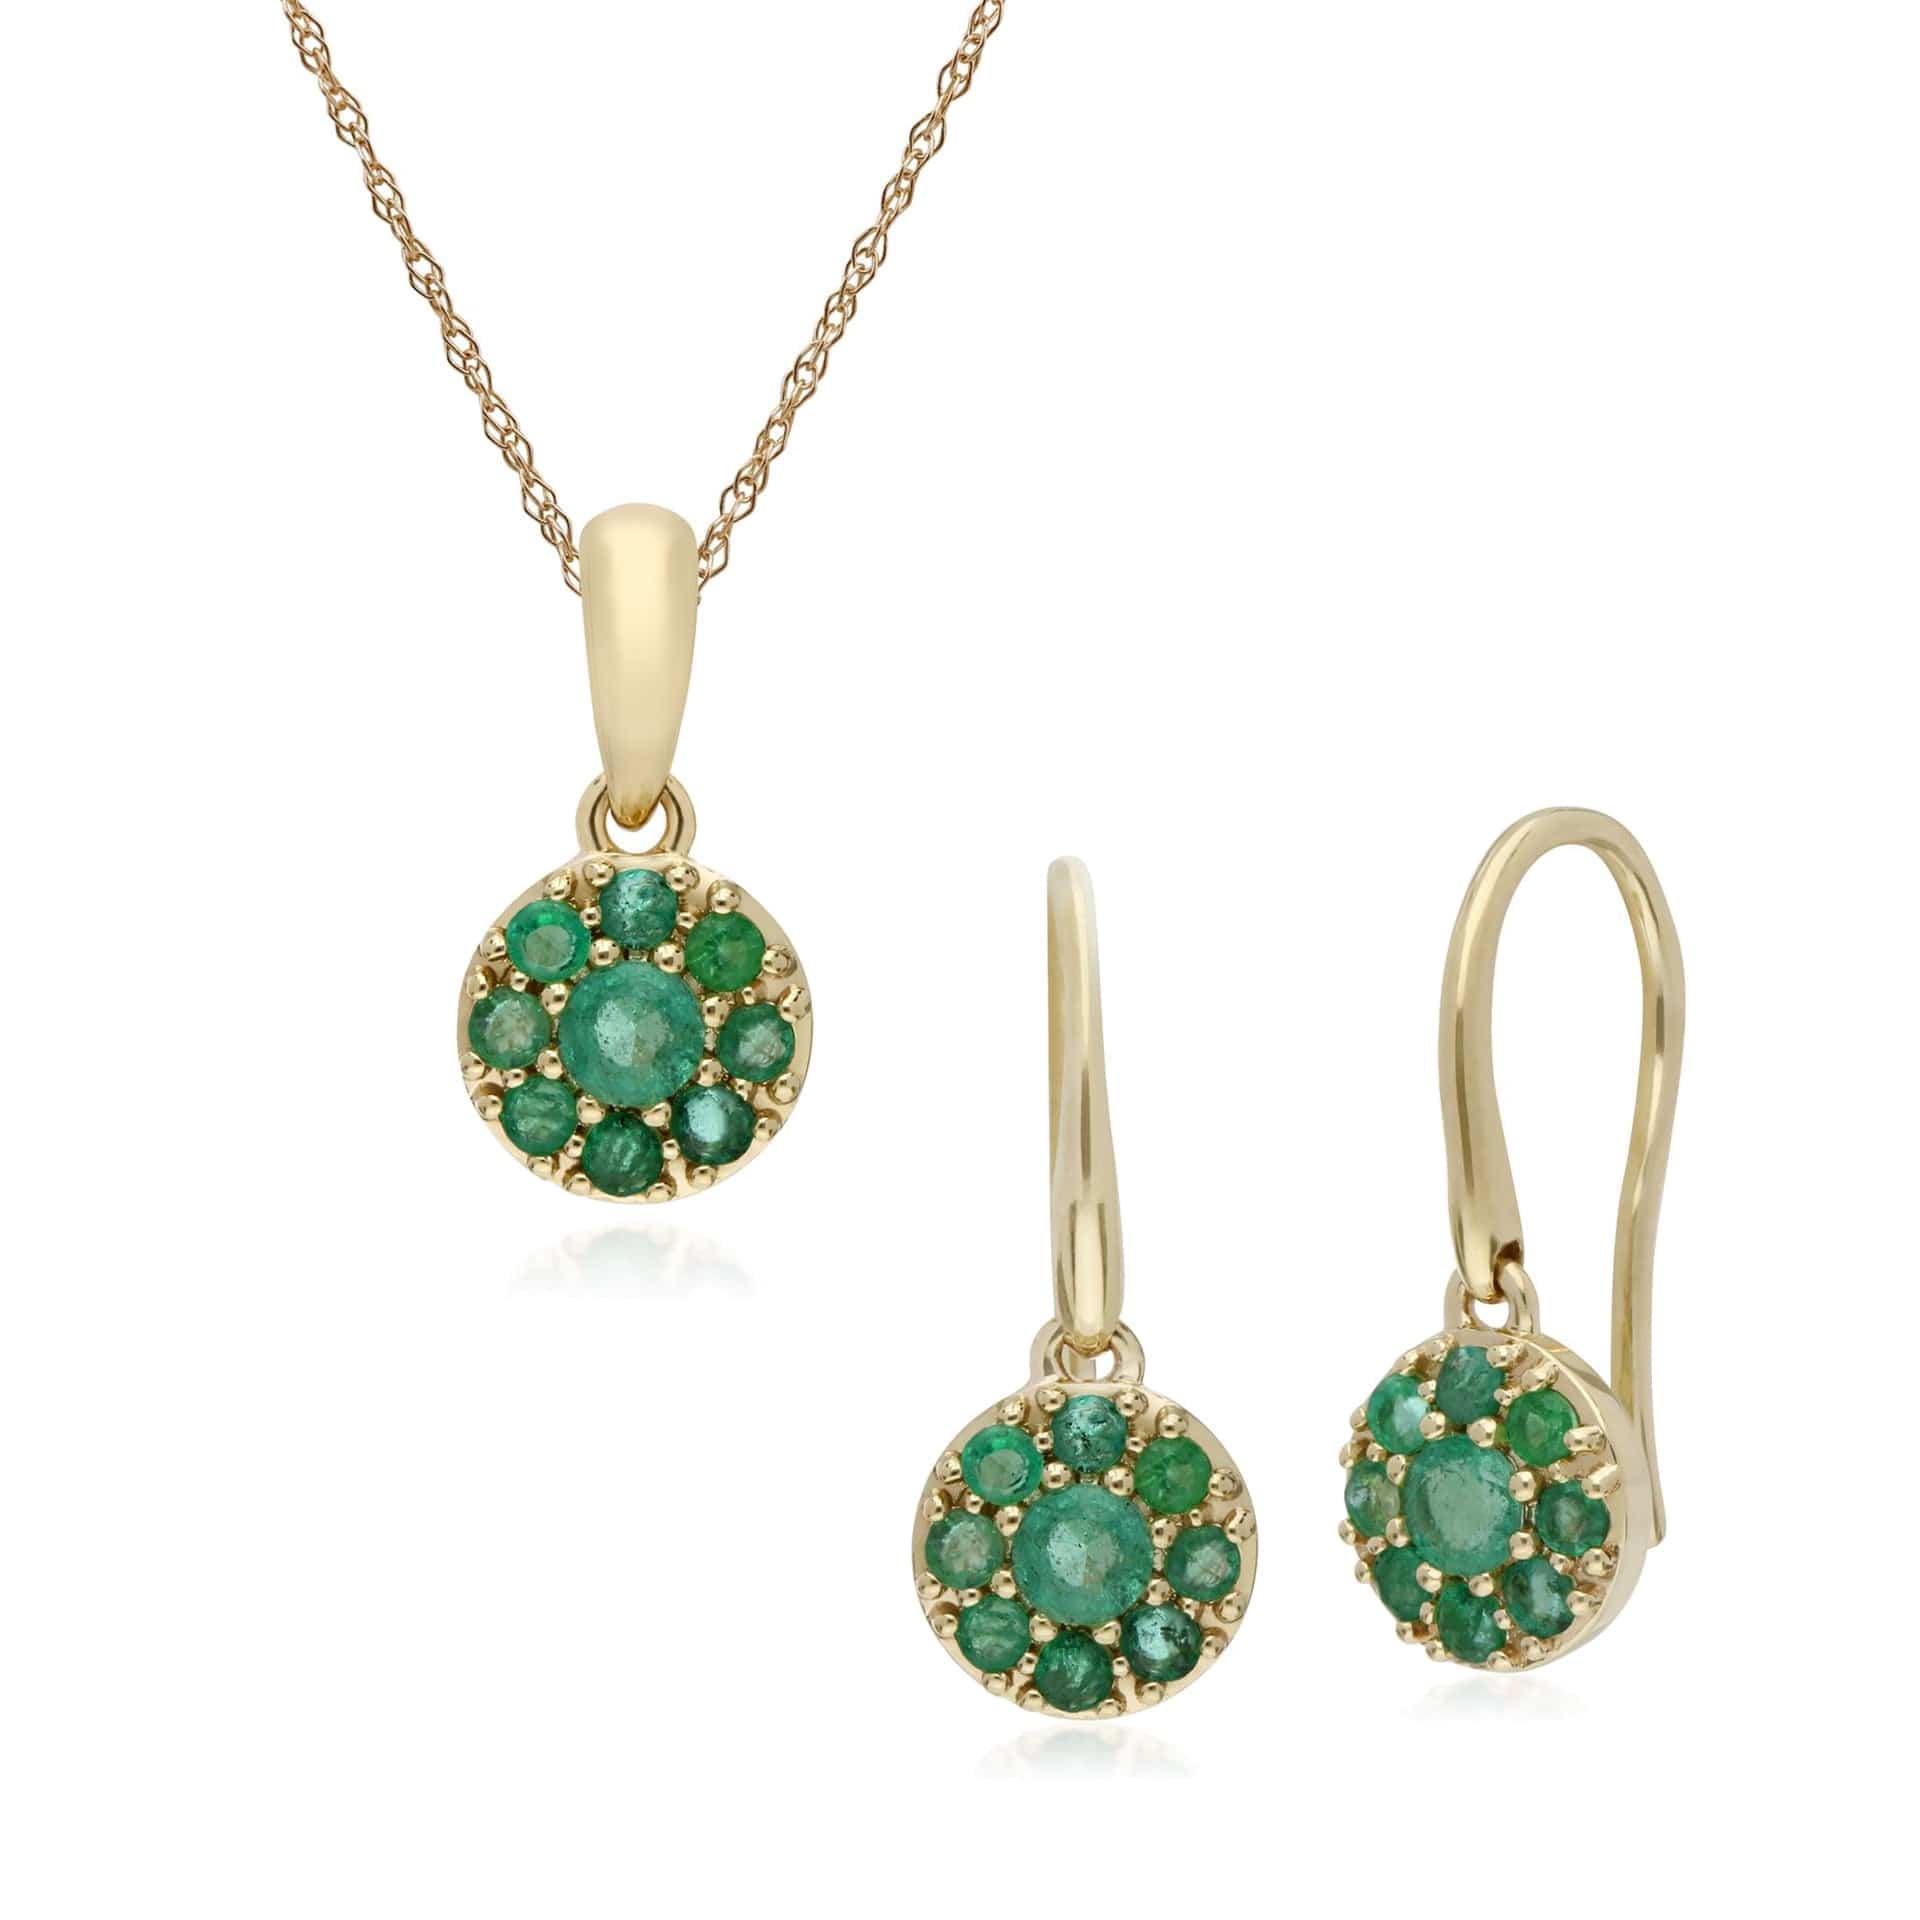 135E1573039-135P1910039 Classic Round Emerald Cluster Drop Earrings & Pendant Set in 9ct Yellow Gold 1